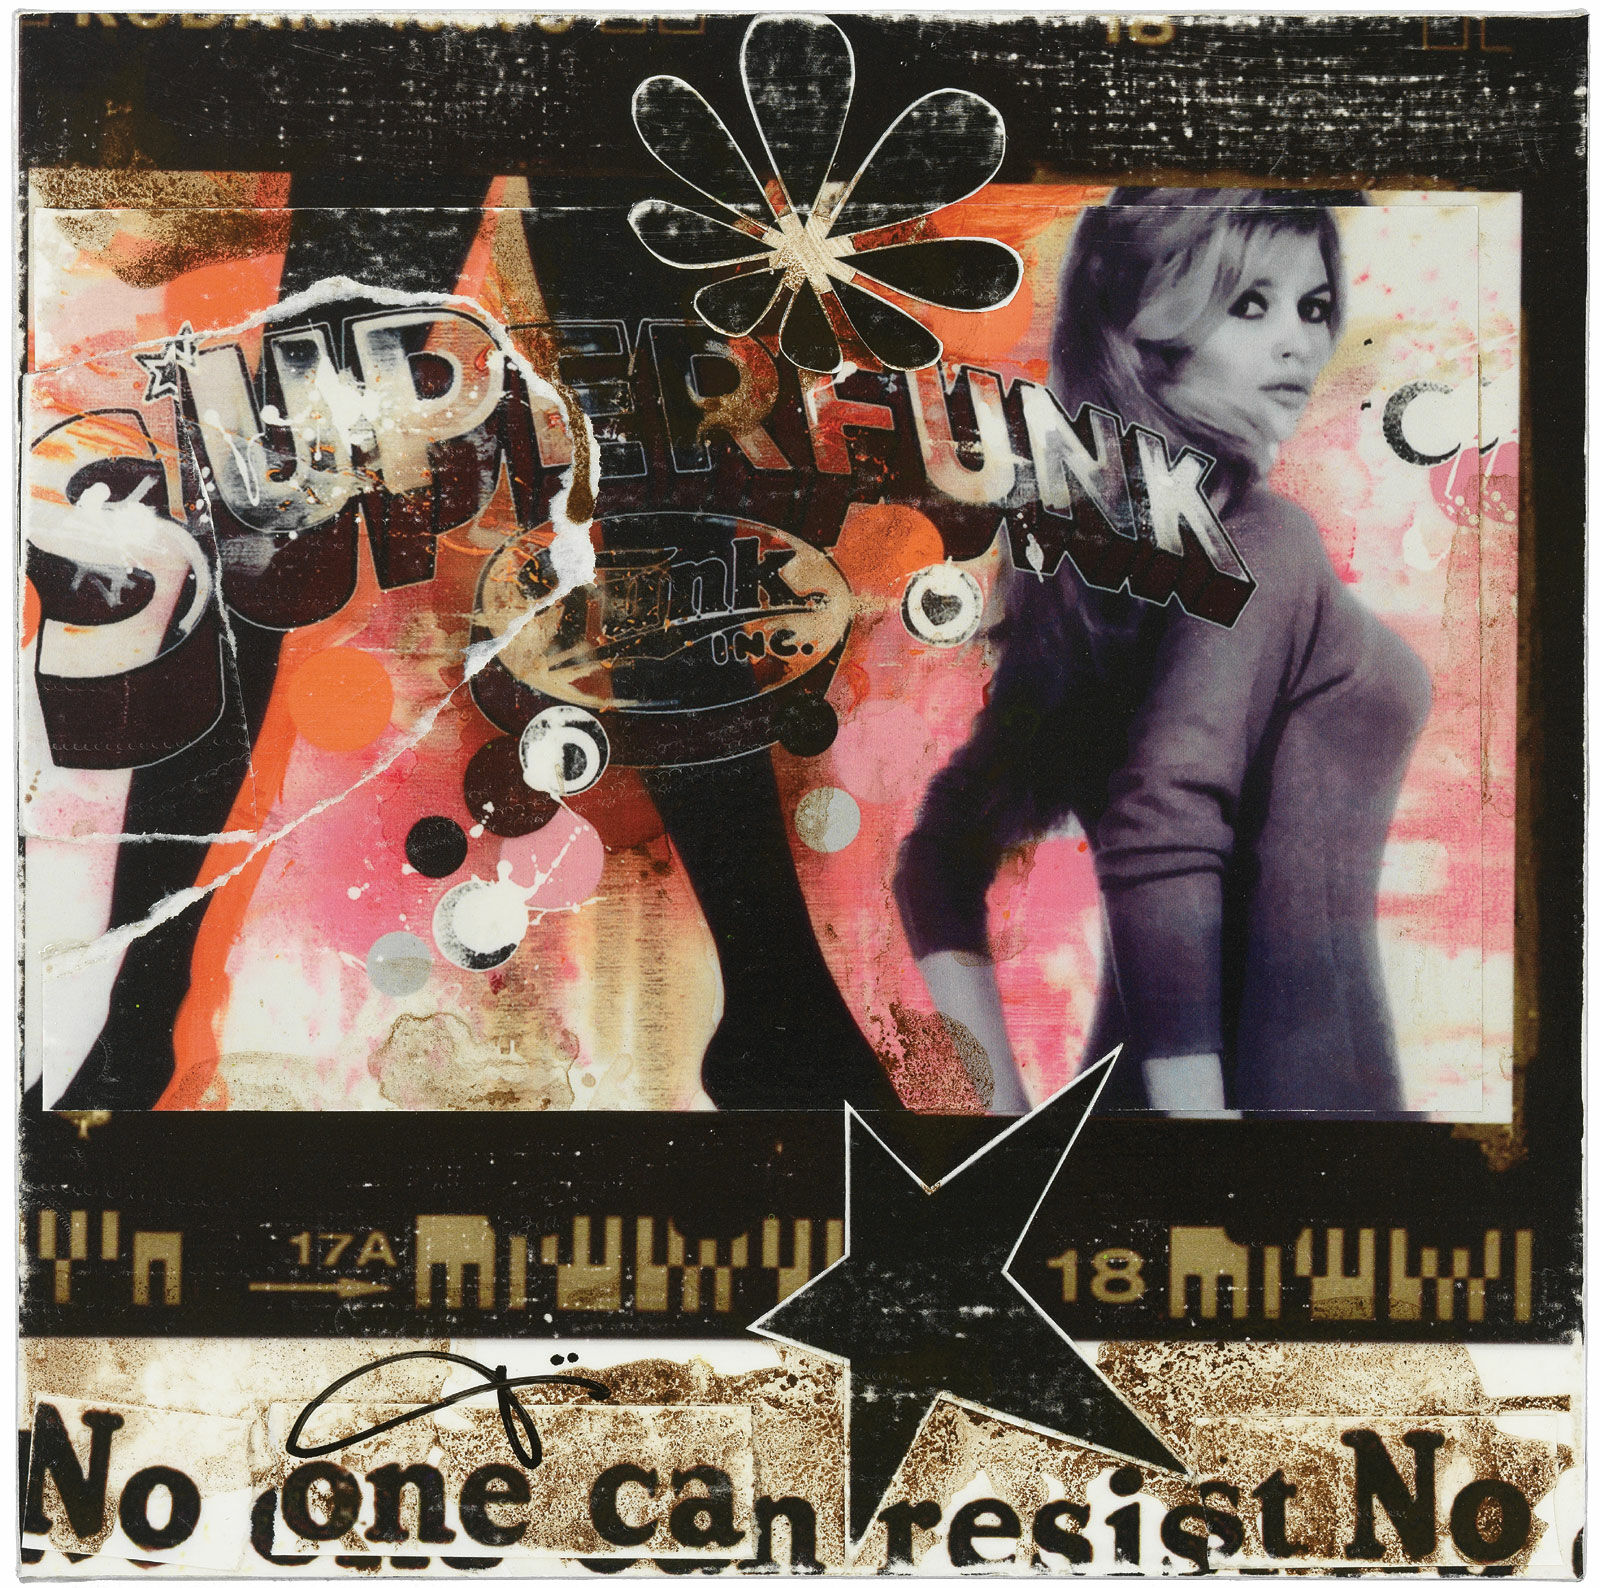 Picture "No resist" (2015) by Jörg Döring